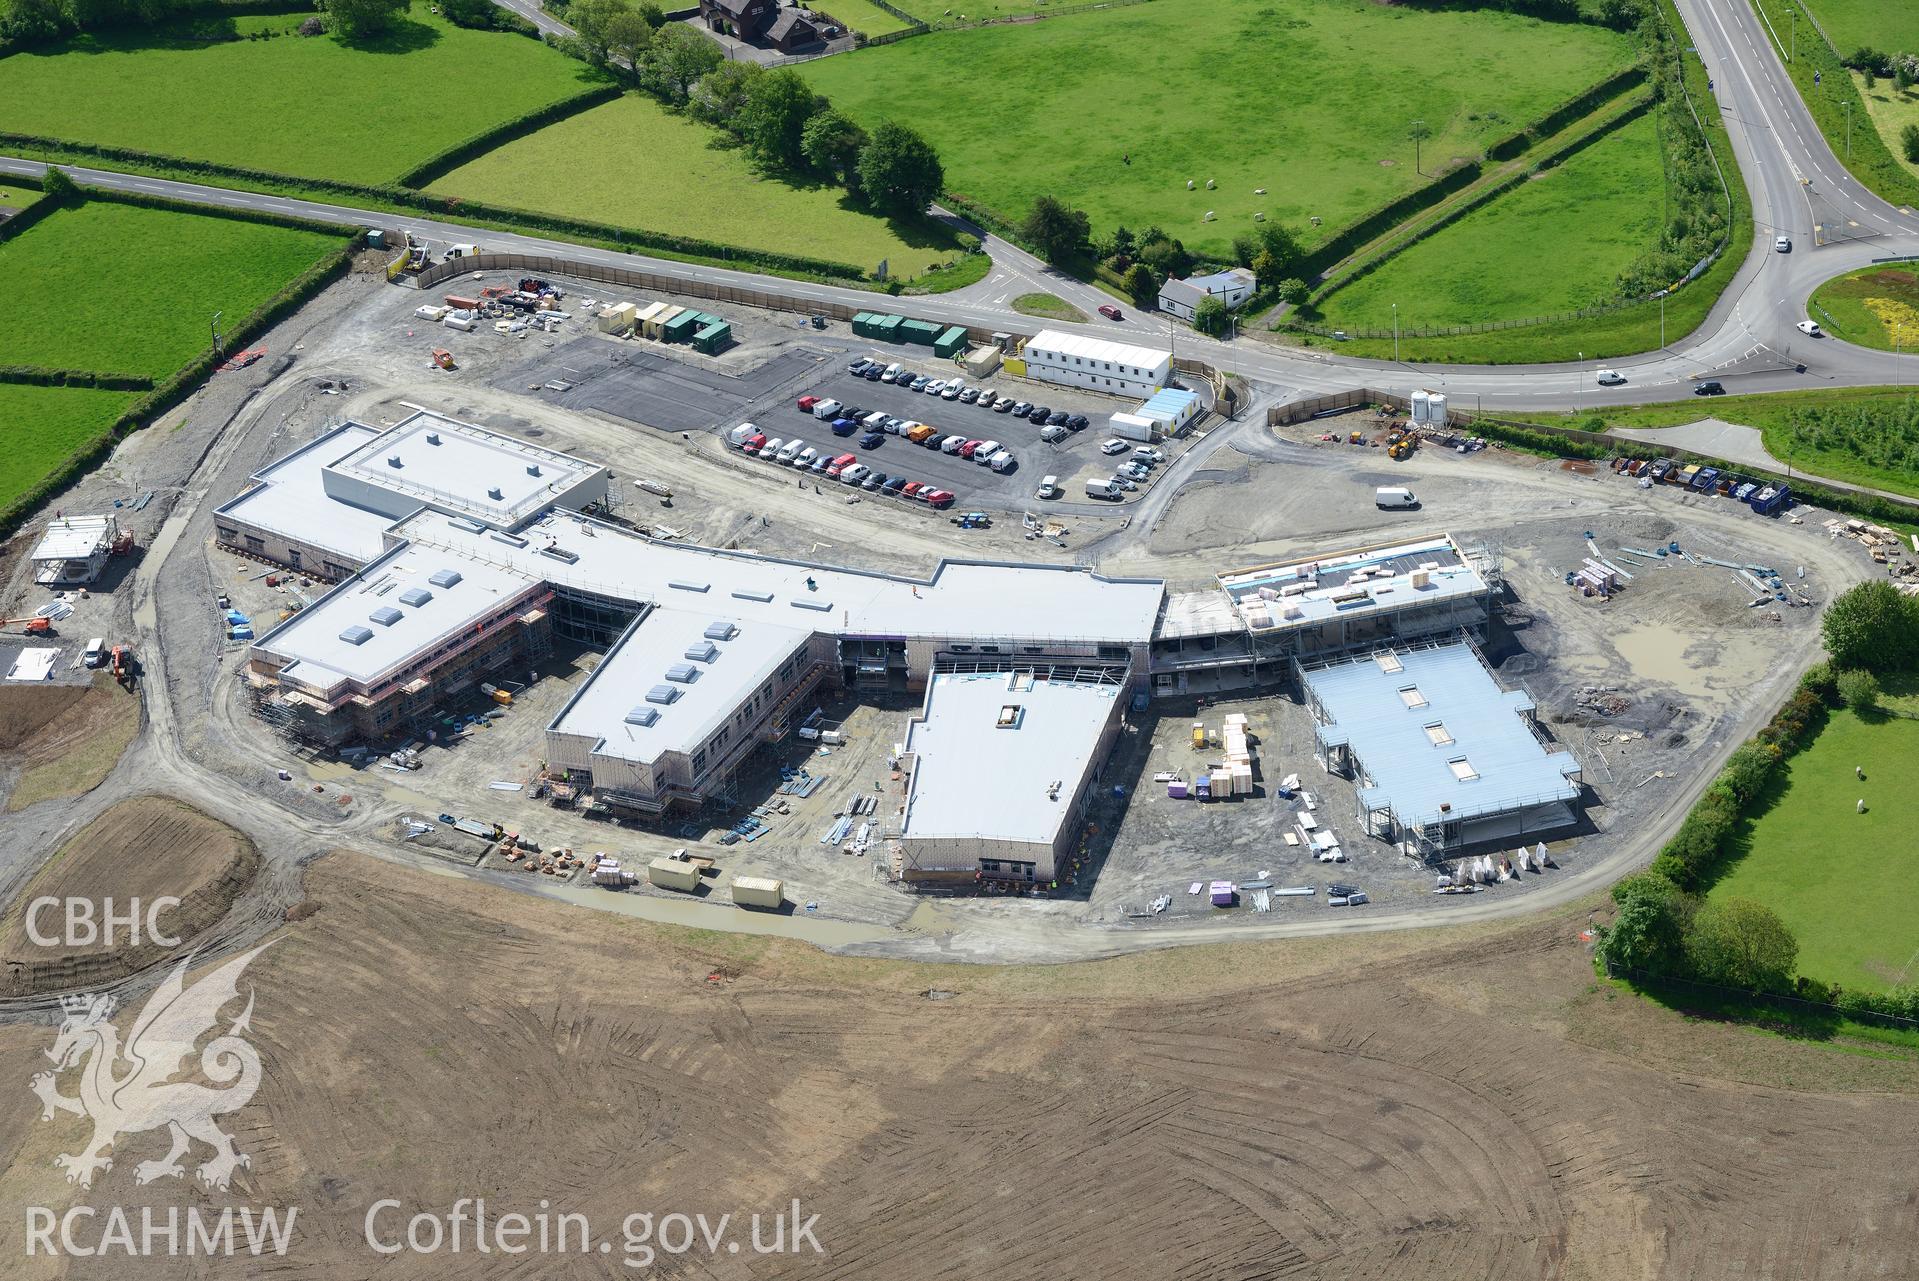 Ysgol Bro Teifi, Llandysul. Oblique aerial photograph taken during the Royal Commission's programme of archaeological aerial reconnaissance by Toby Driver on 3rd June 2015.